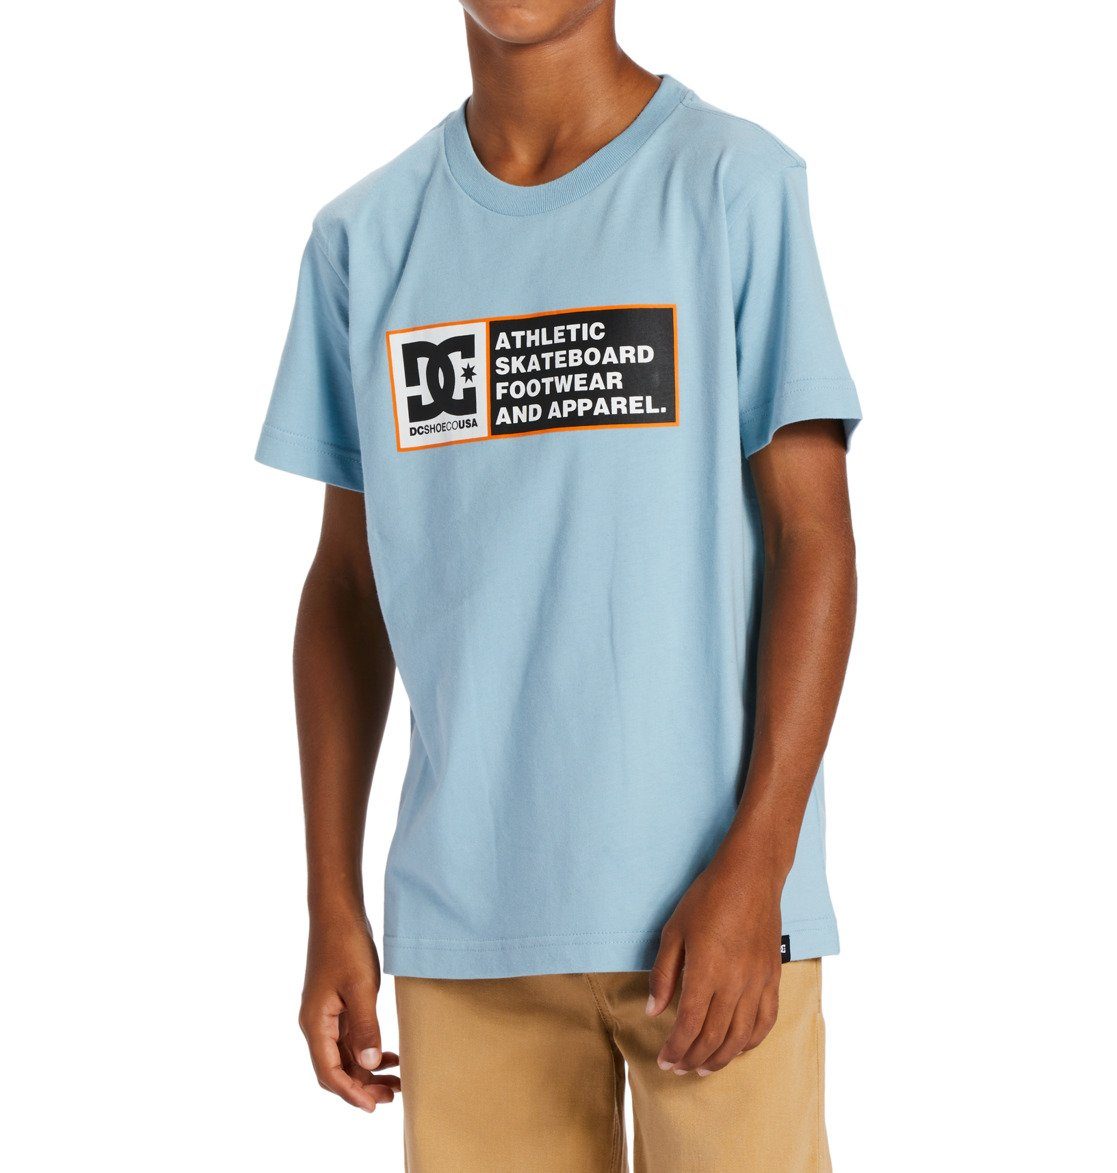 T-Shirt Me Density DC DC Shoes Not Zone Forget